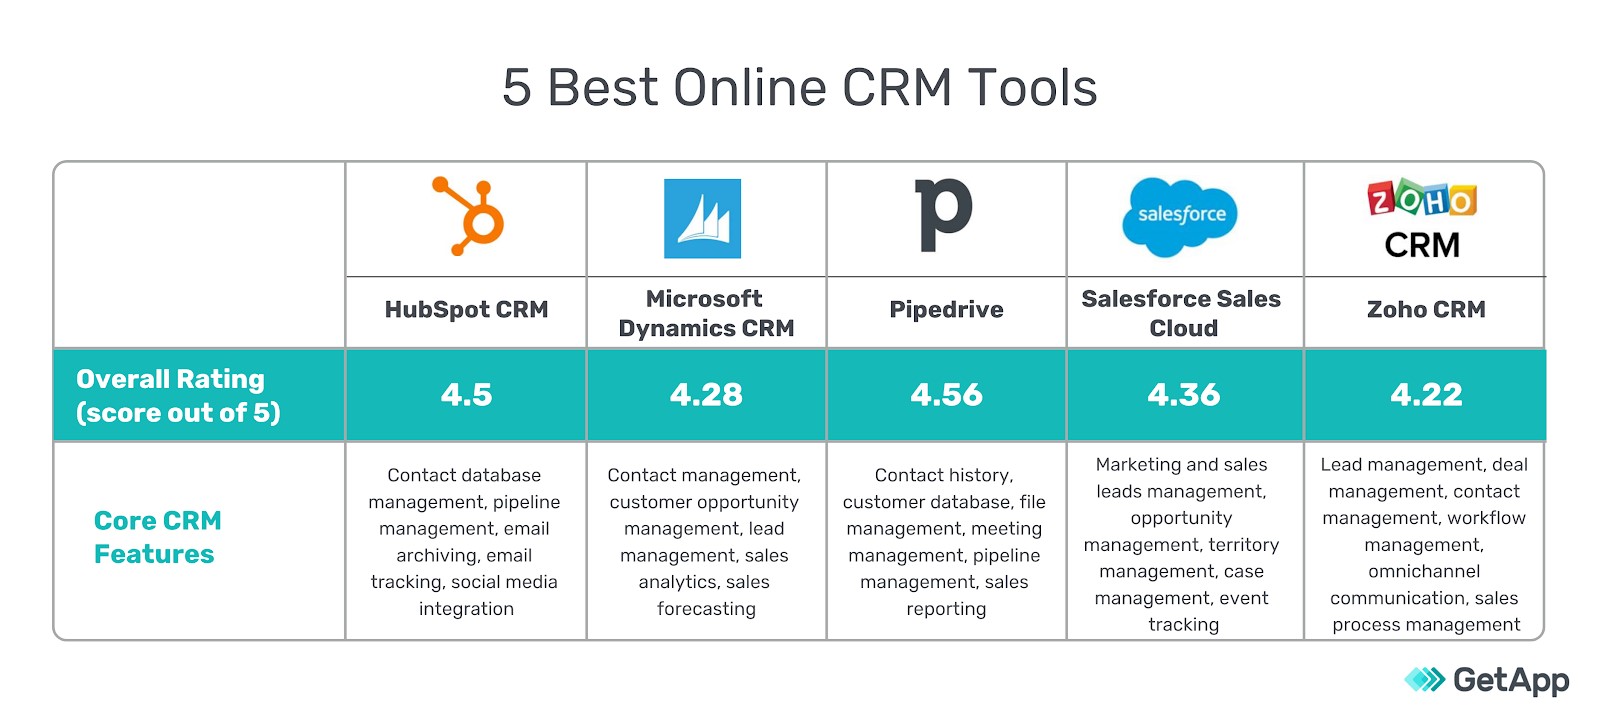 crm tools features